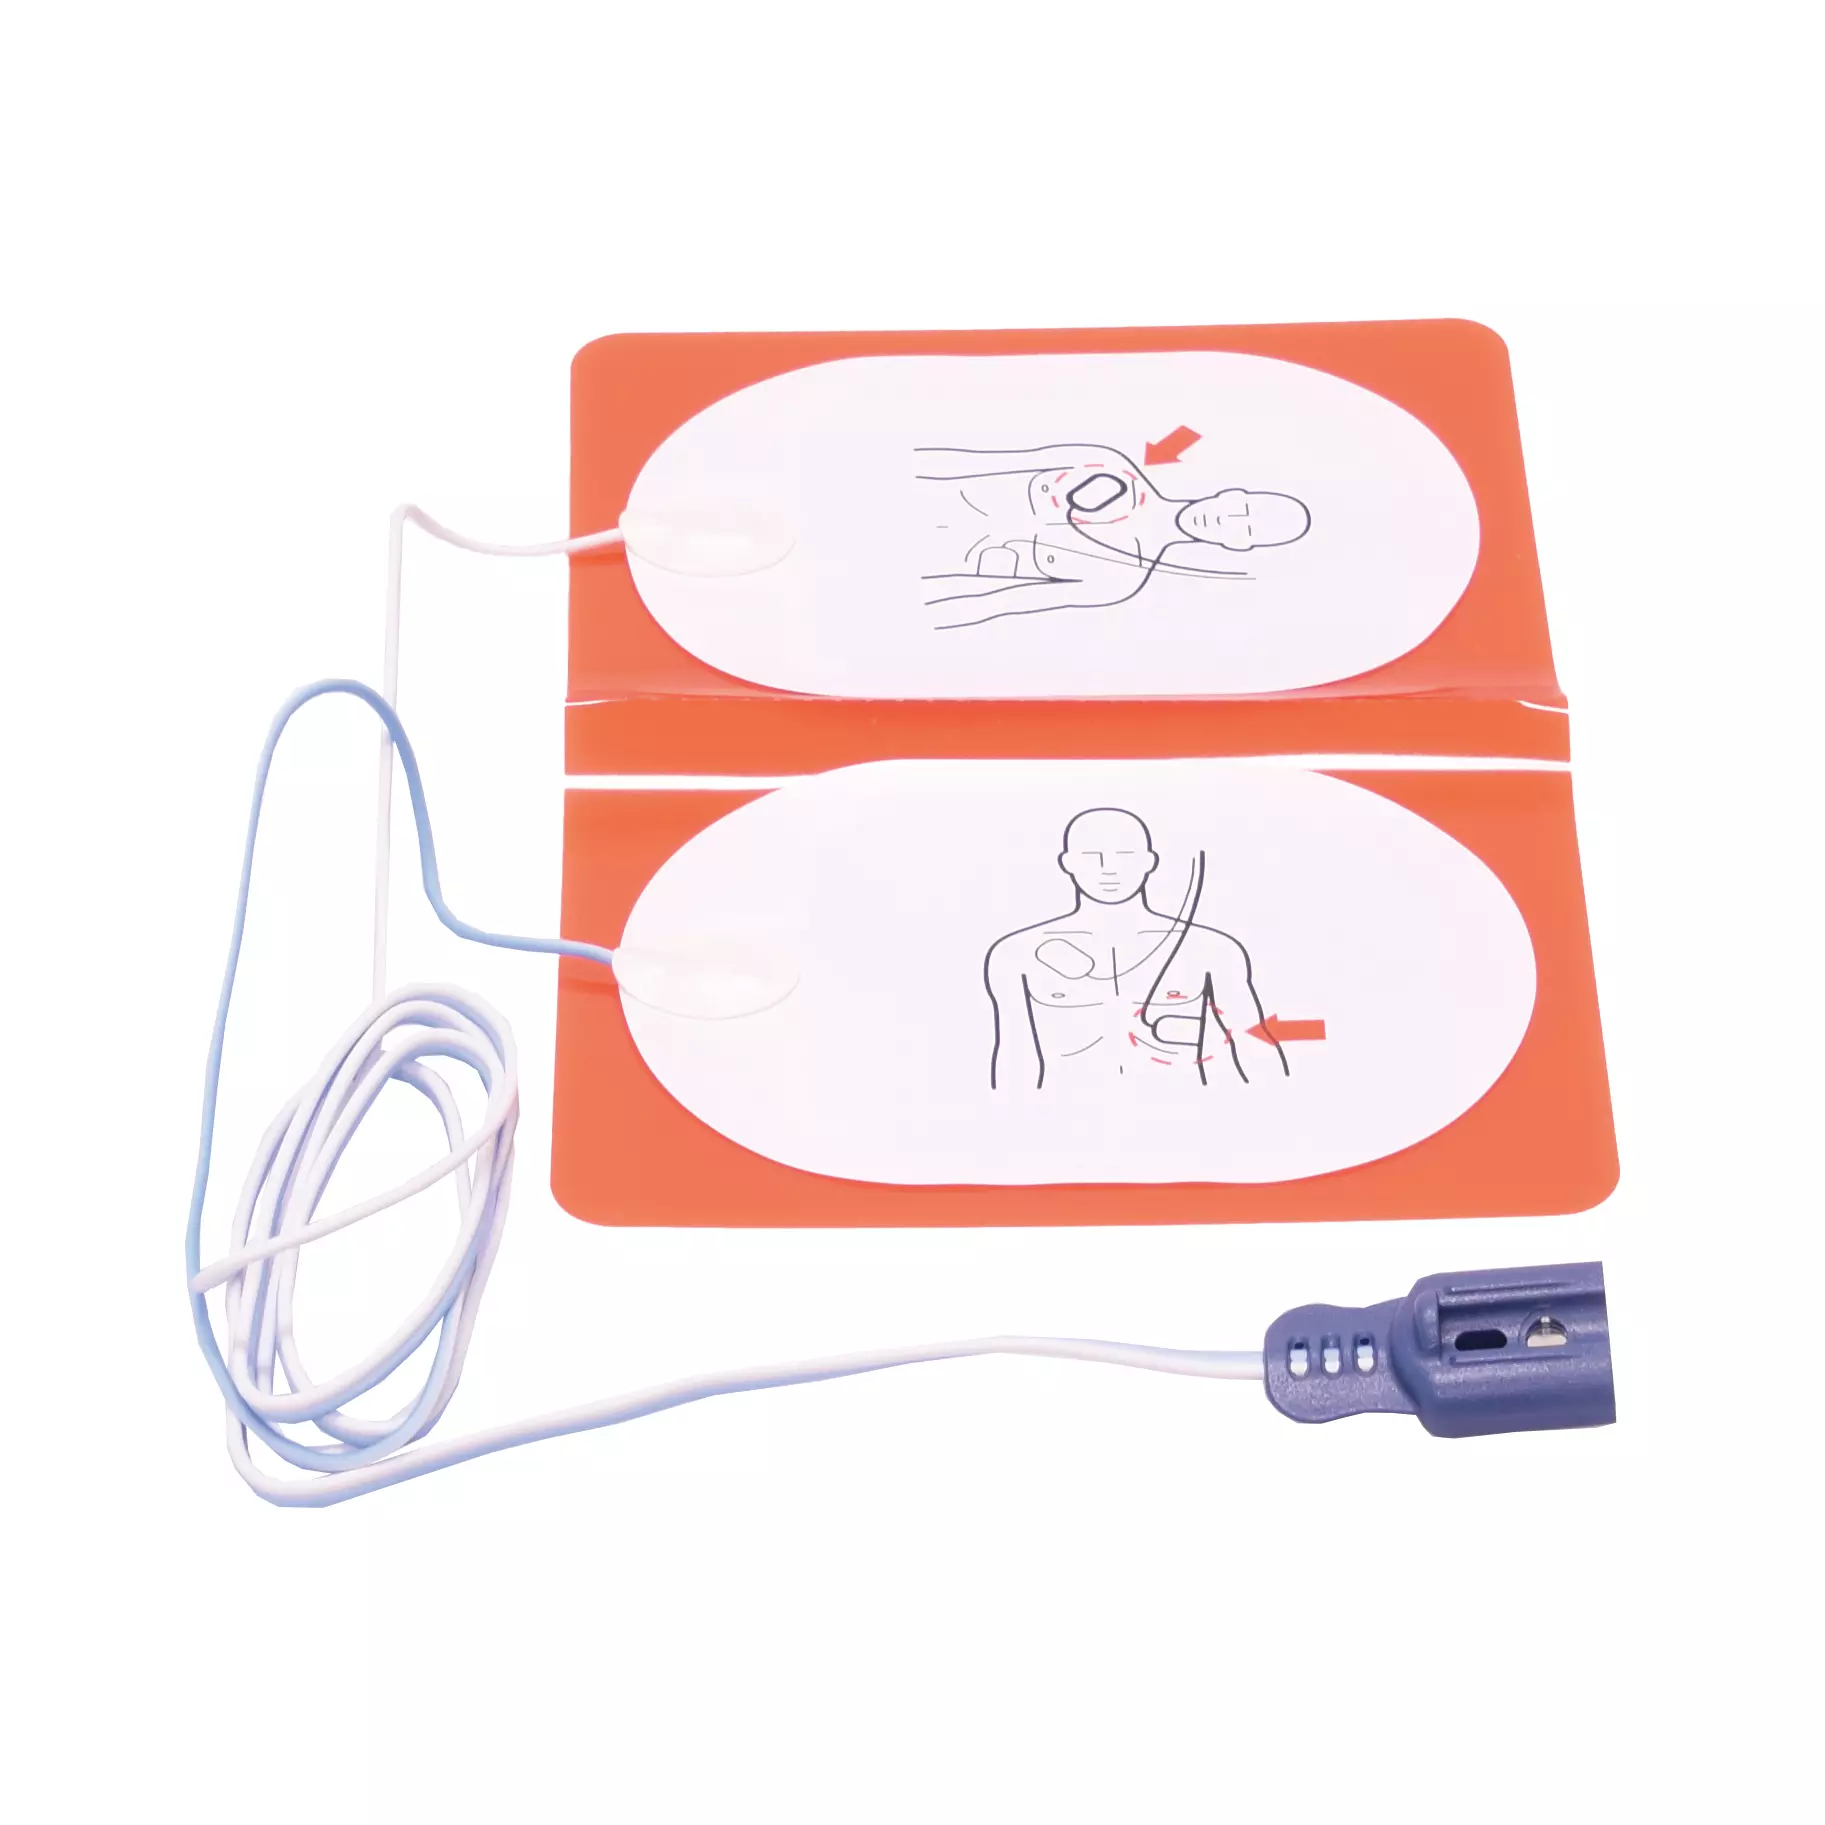 Adult defibrillation electrodes for Philips Heartstart FR2 and FR2+, 1 pair